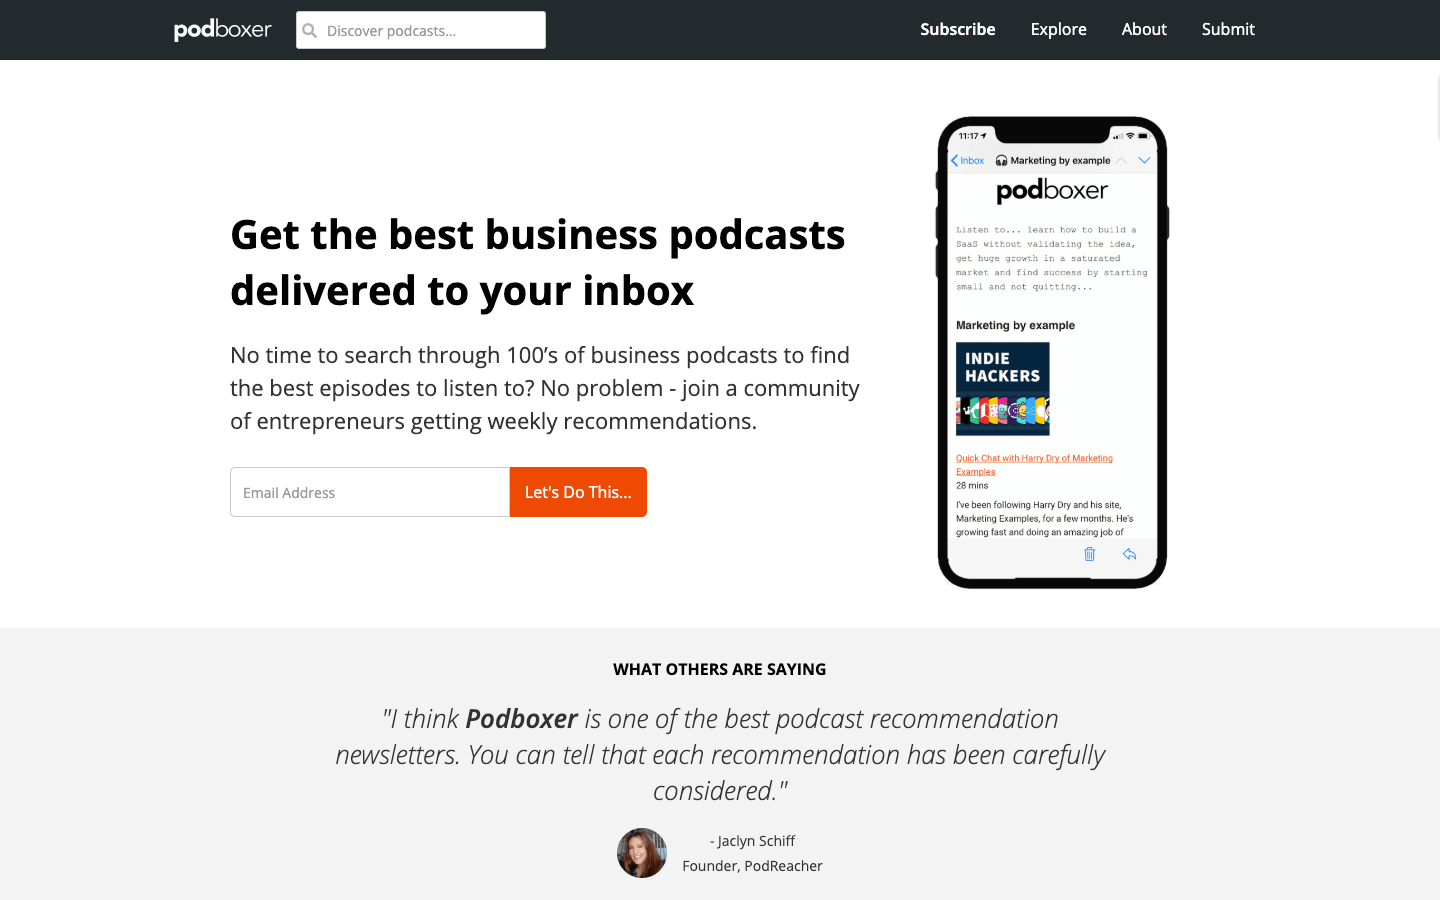 Podboxer homepage